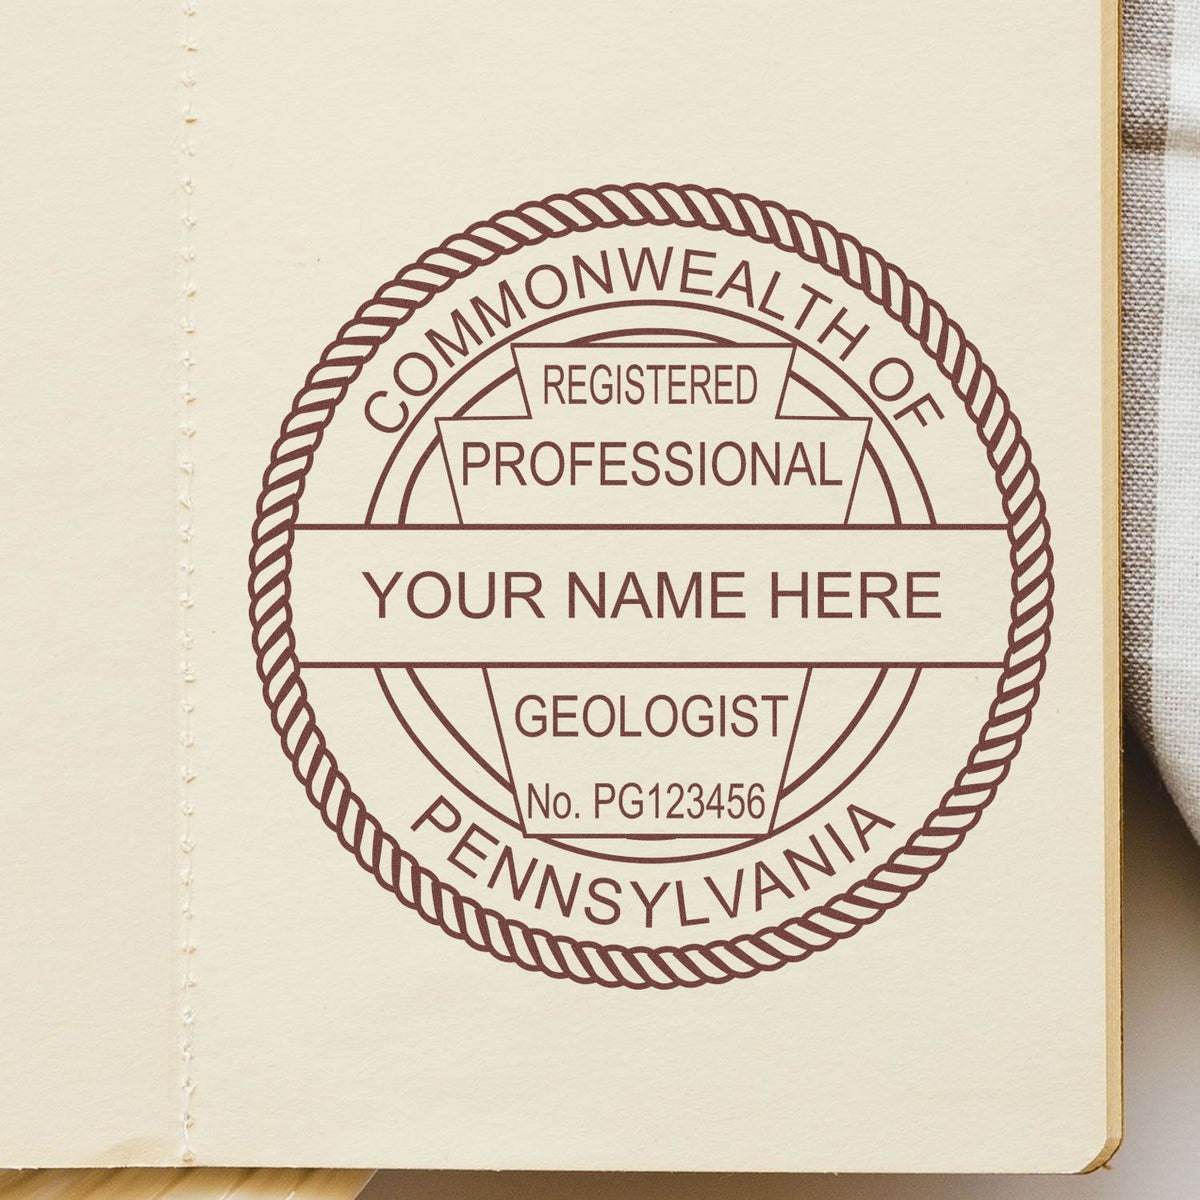 Another Example of a stamped impression of the Digital Pennsylvania Geologist Stamp, Electronic Seal for Pennsylvania Geologist on a office form